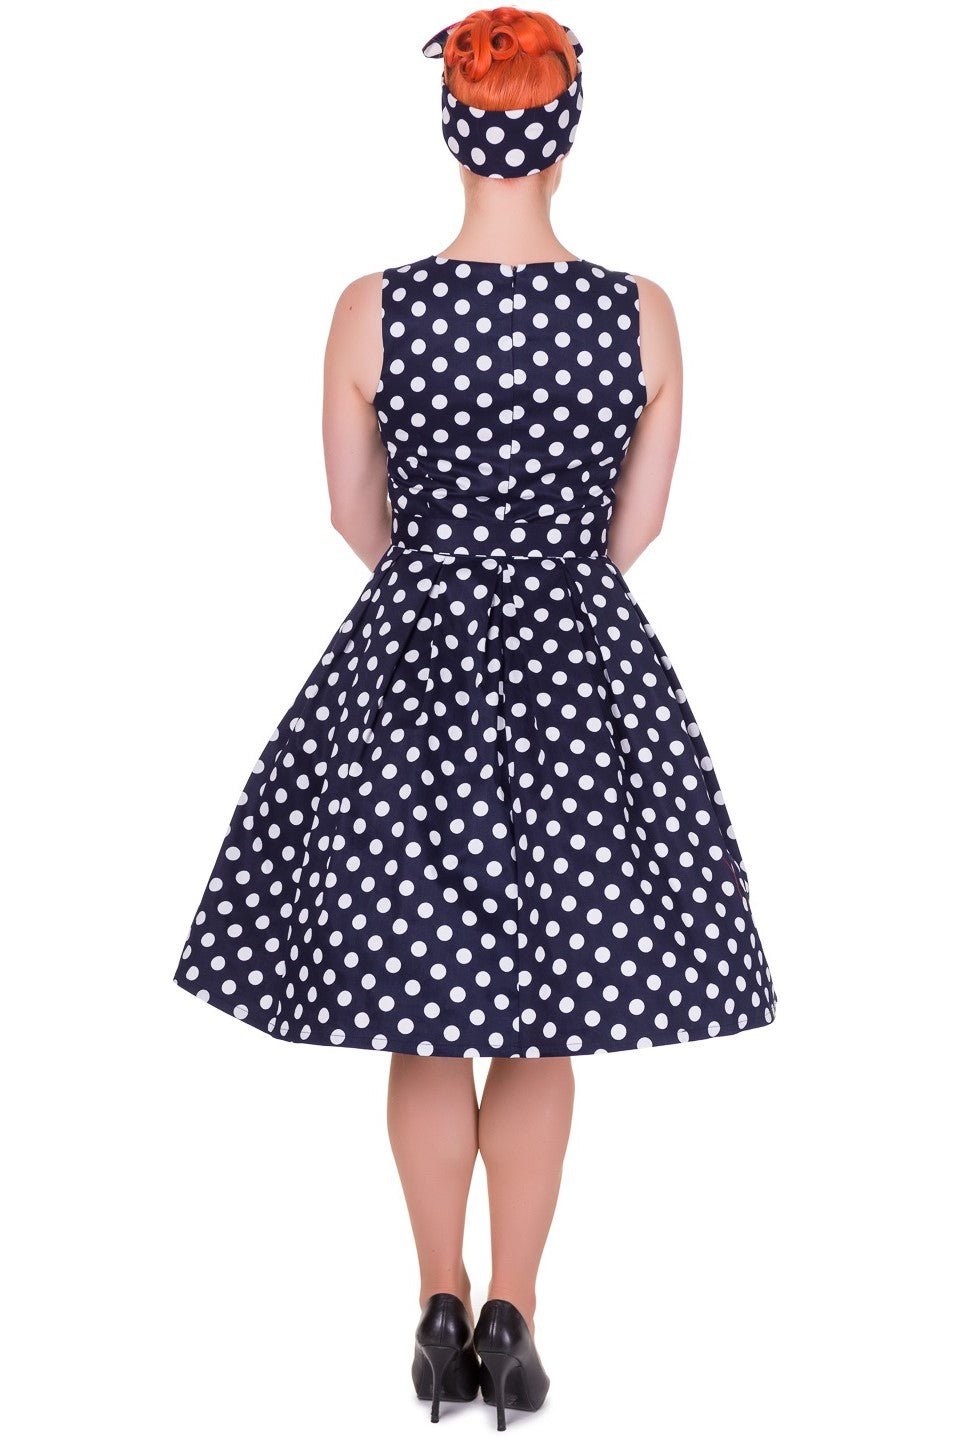 Retro Swing Dress in Navy Blue and White Dots